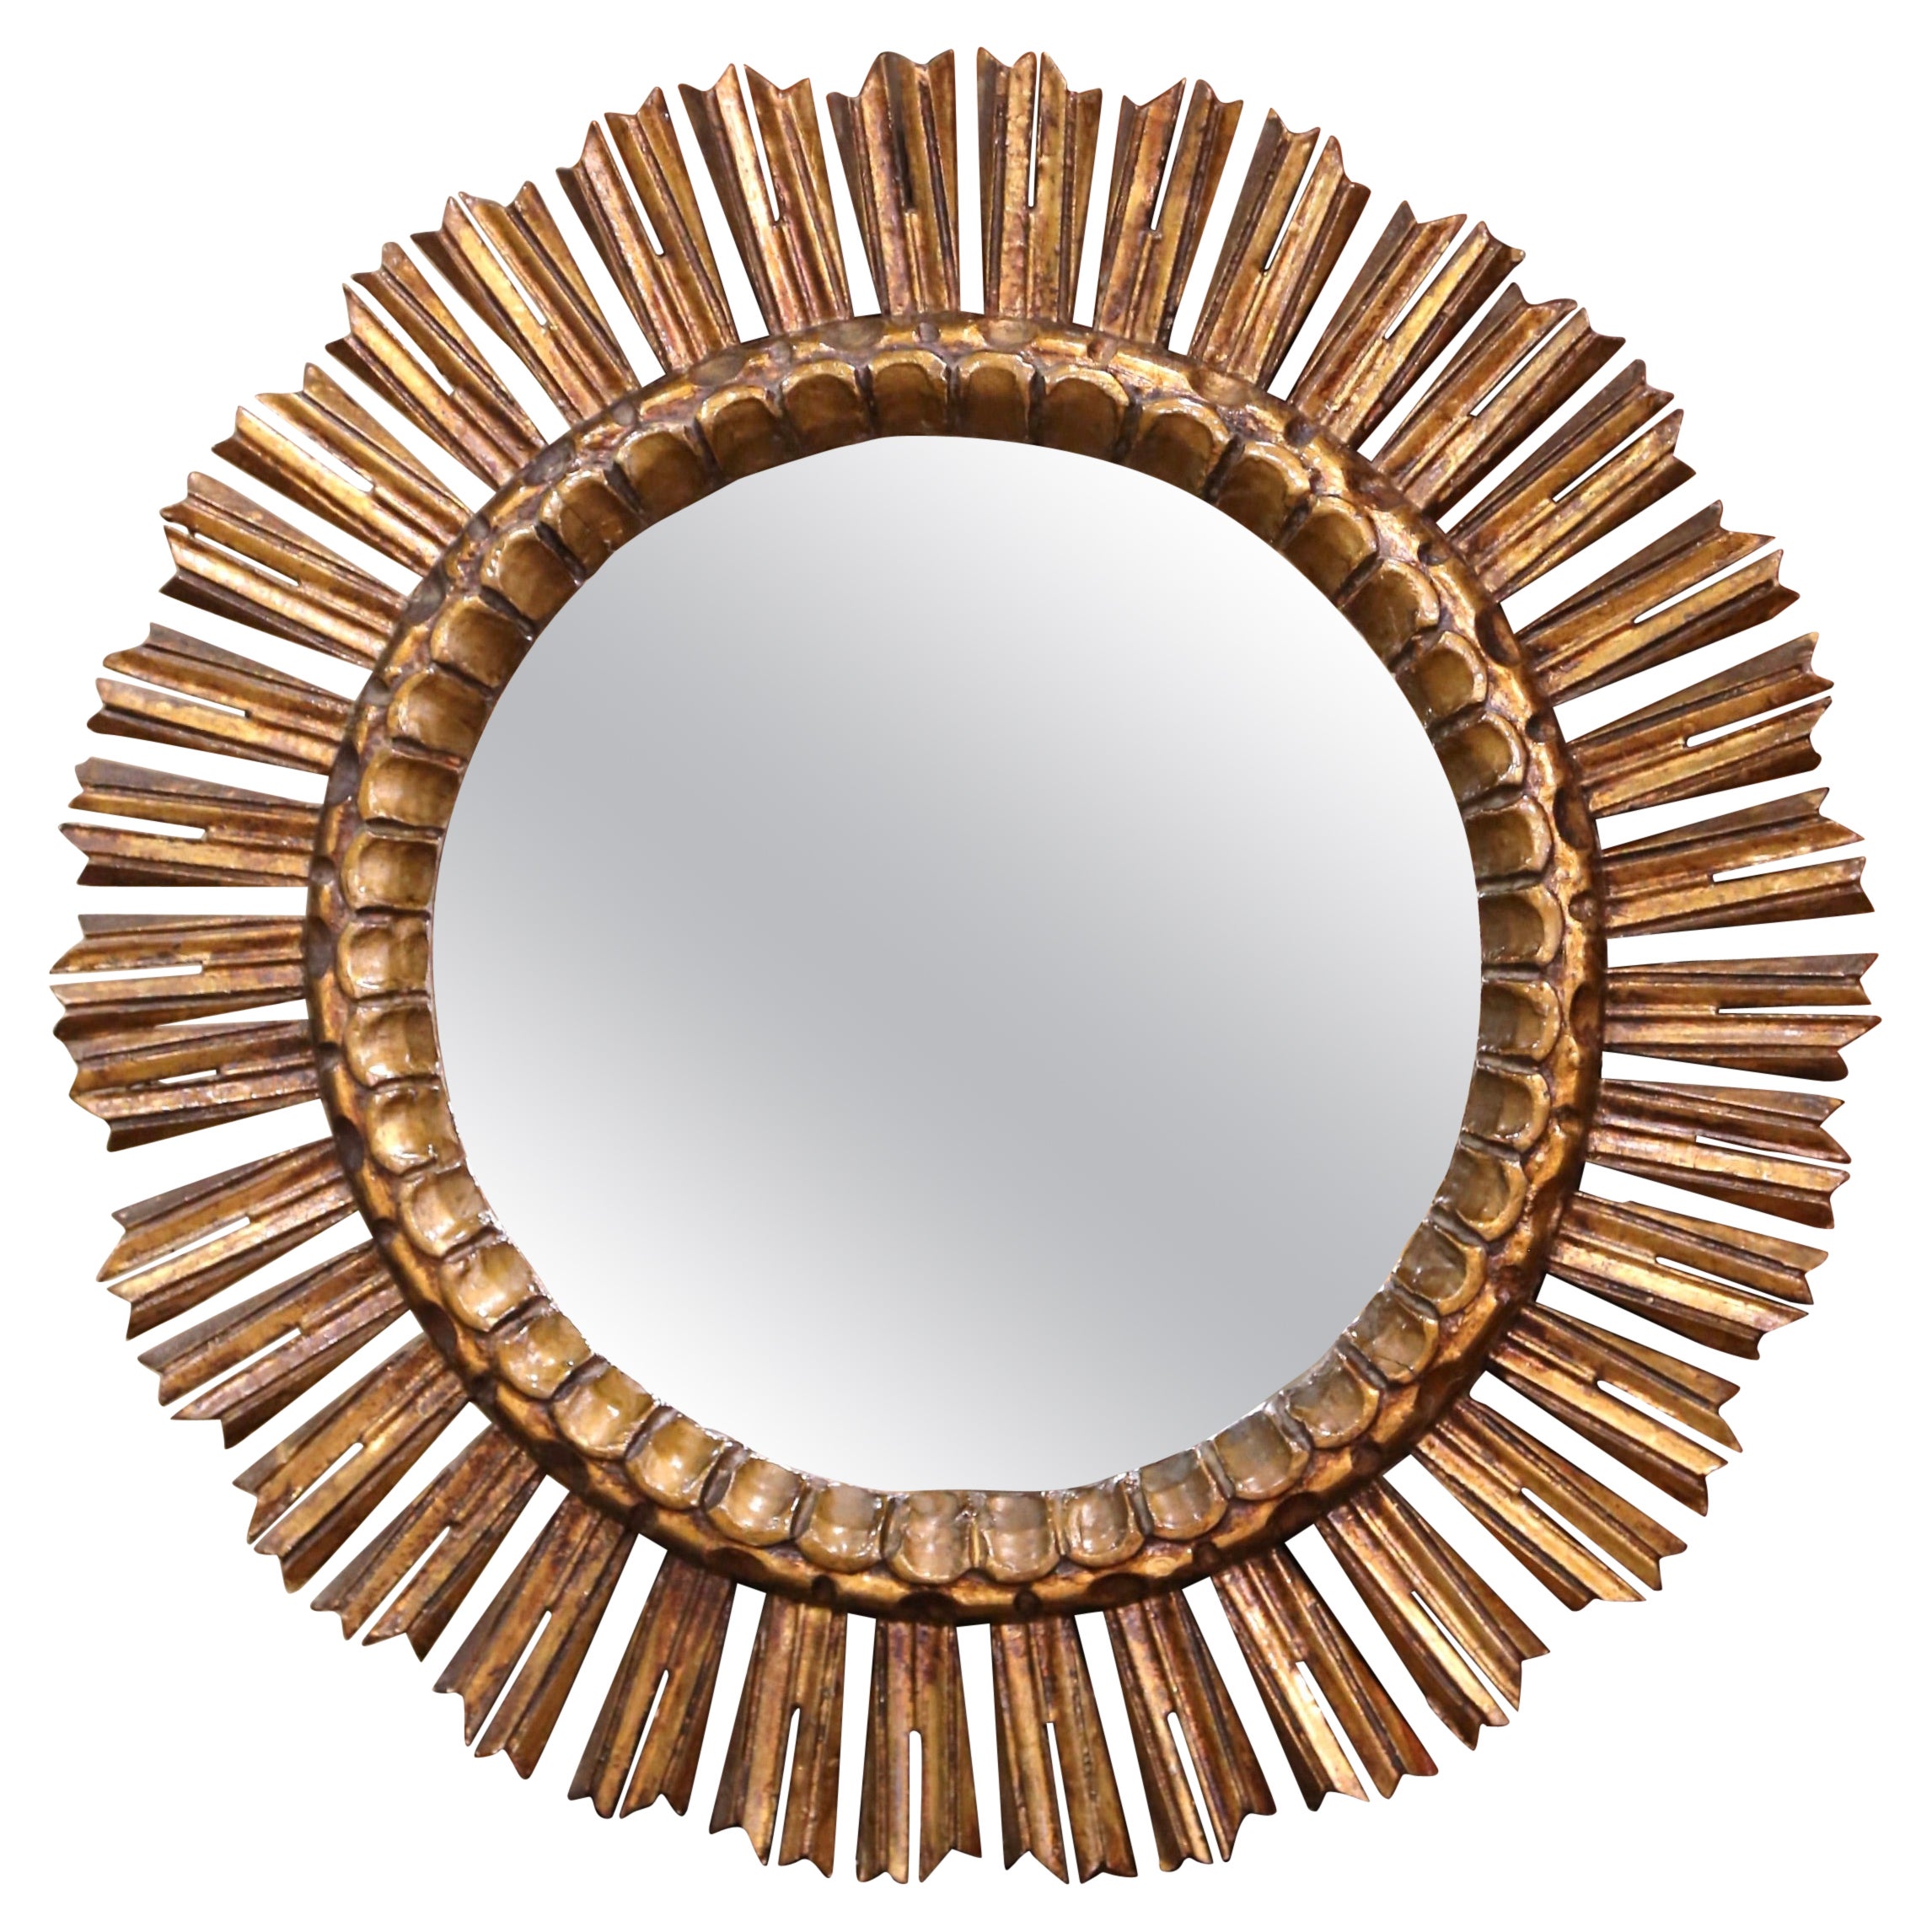  Early 20th Century French Carved Giltwood Sunburst Mirror